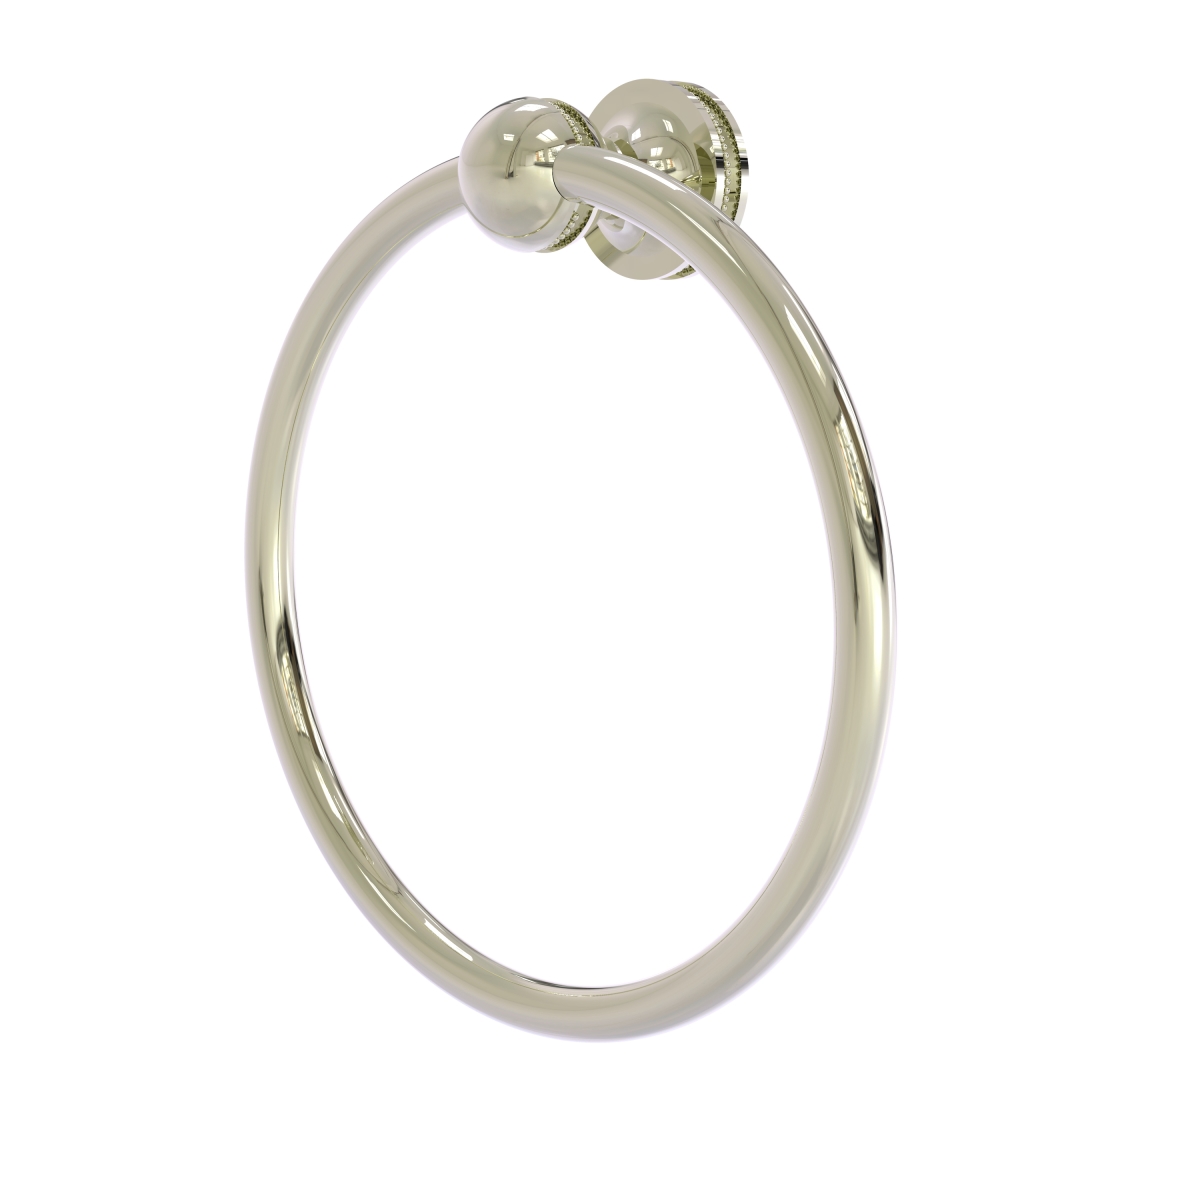 Allied Brass MA-16-PNI Mambo Collection Towel Ring, Polished Nickel